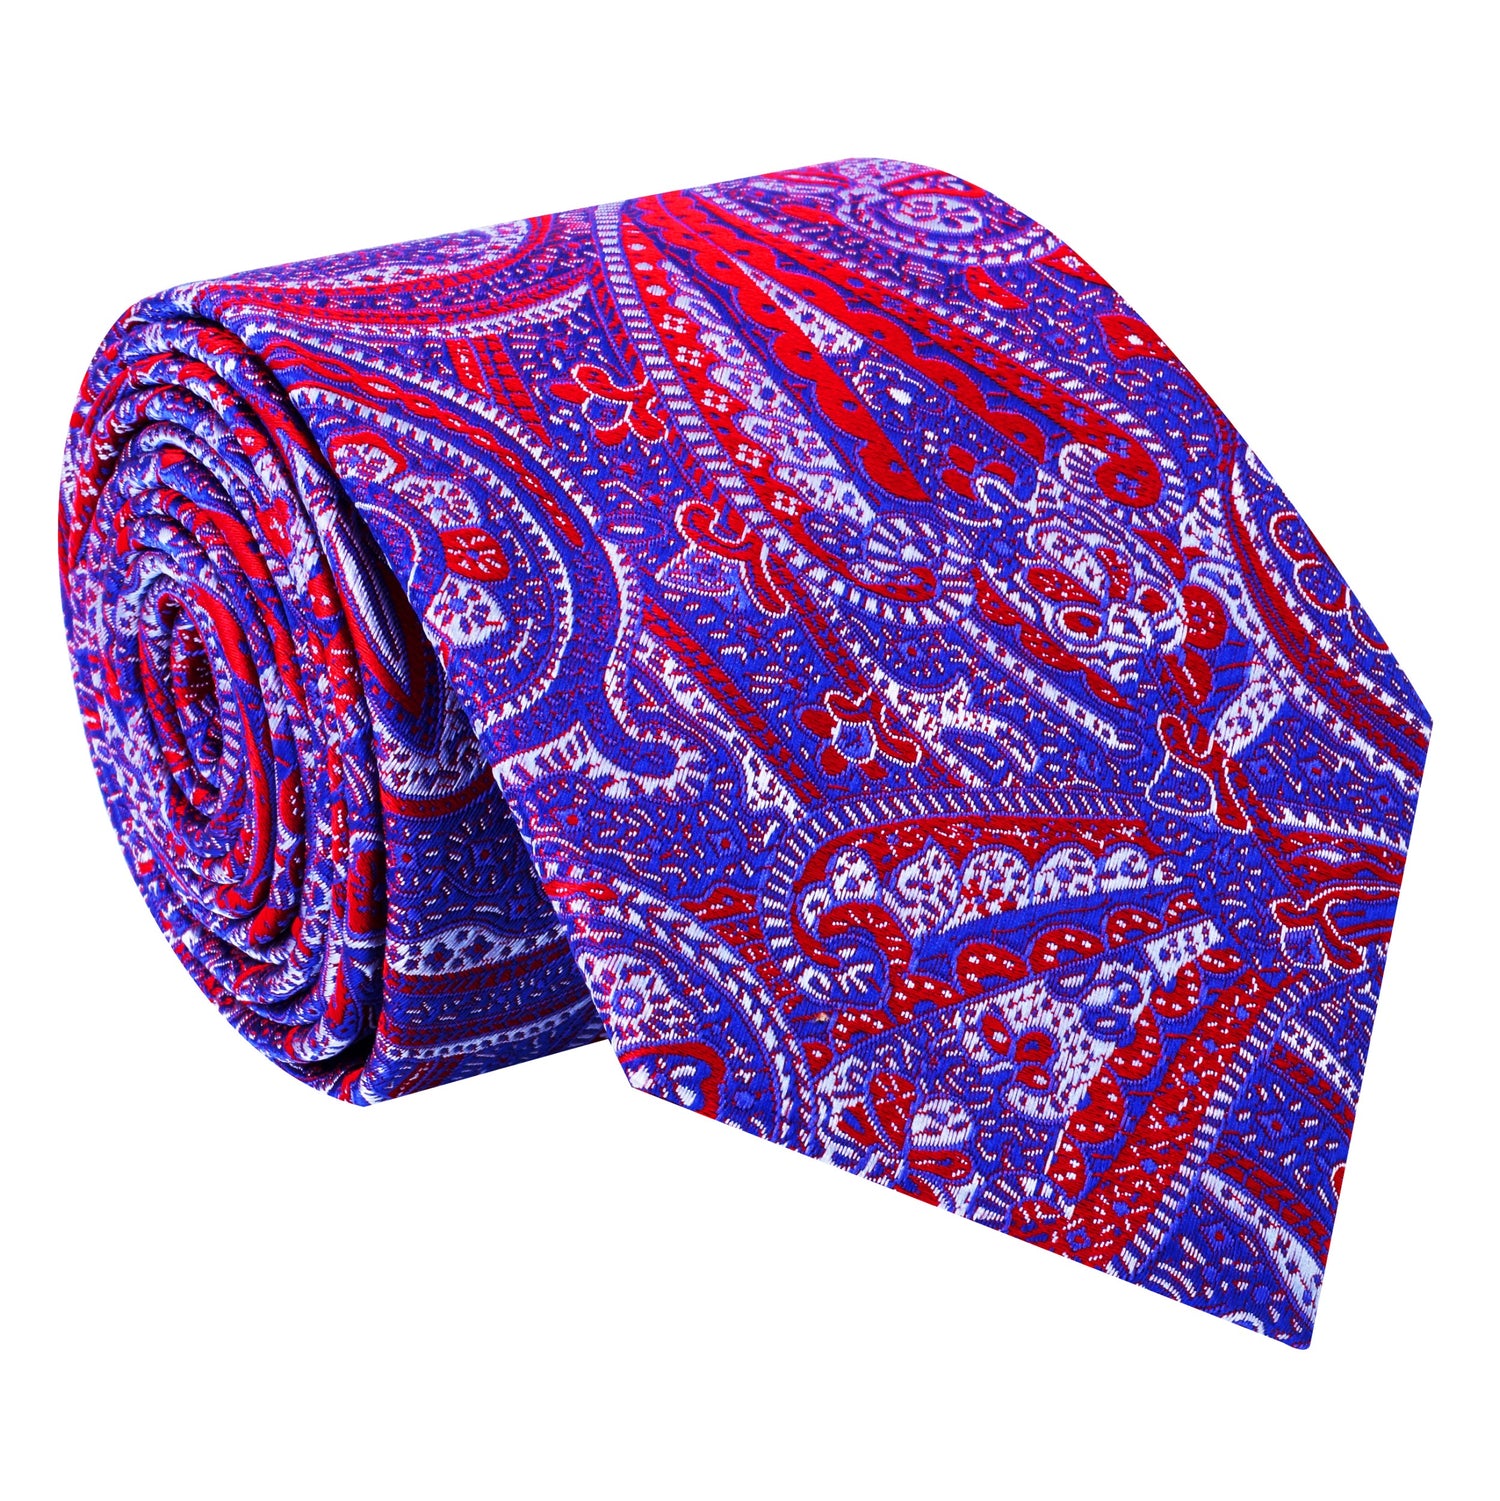 A Red, White, Blue Intricate Design And Paisley Pattern Silk Necktie